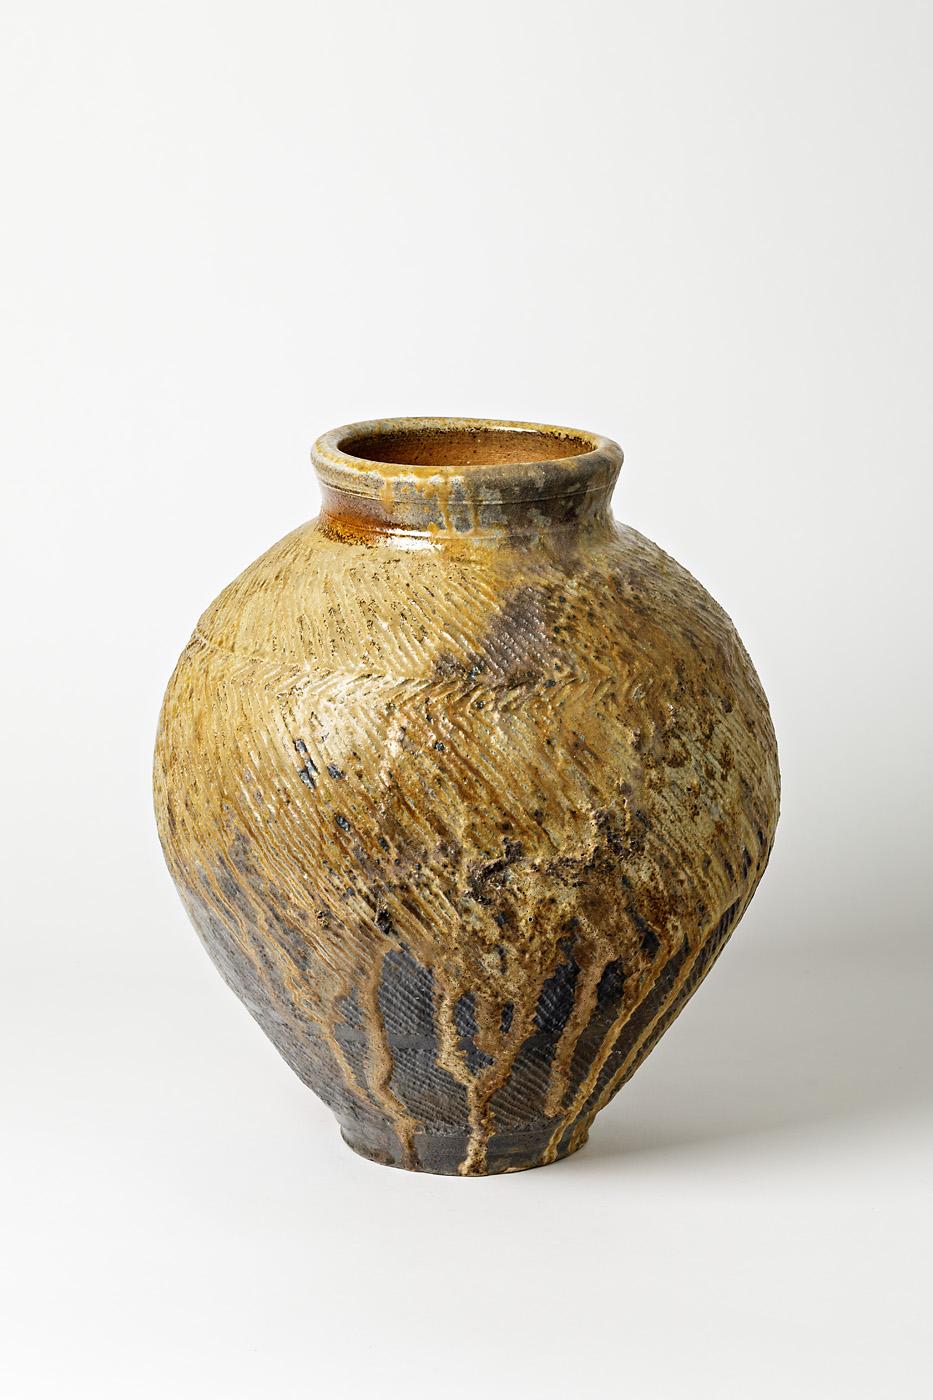 Elegant and important ceramic stoneware vase by Steen Kepp.

Realised in a noborigama kiln in the Japanese style.

Excellent condition.

Signed under the base.

Beautiful firing effect colors.

Dimensions: 38 x 30 x 30cm.